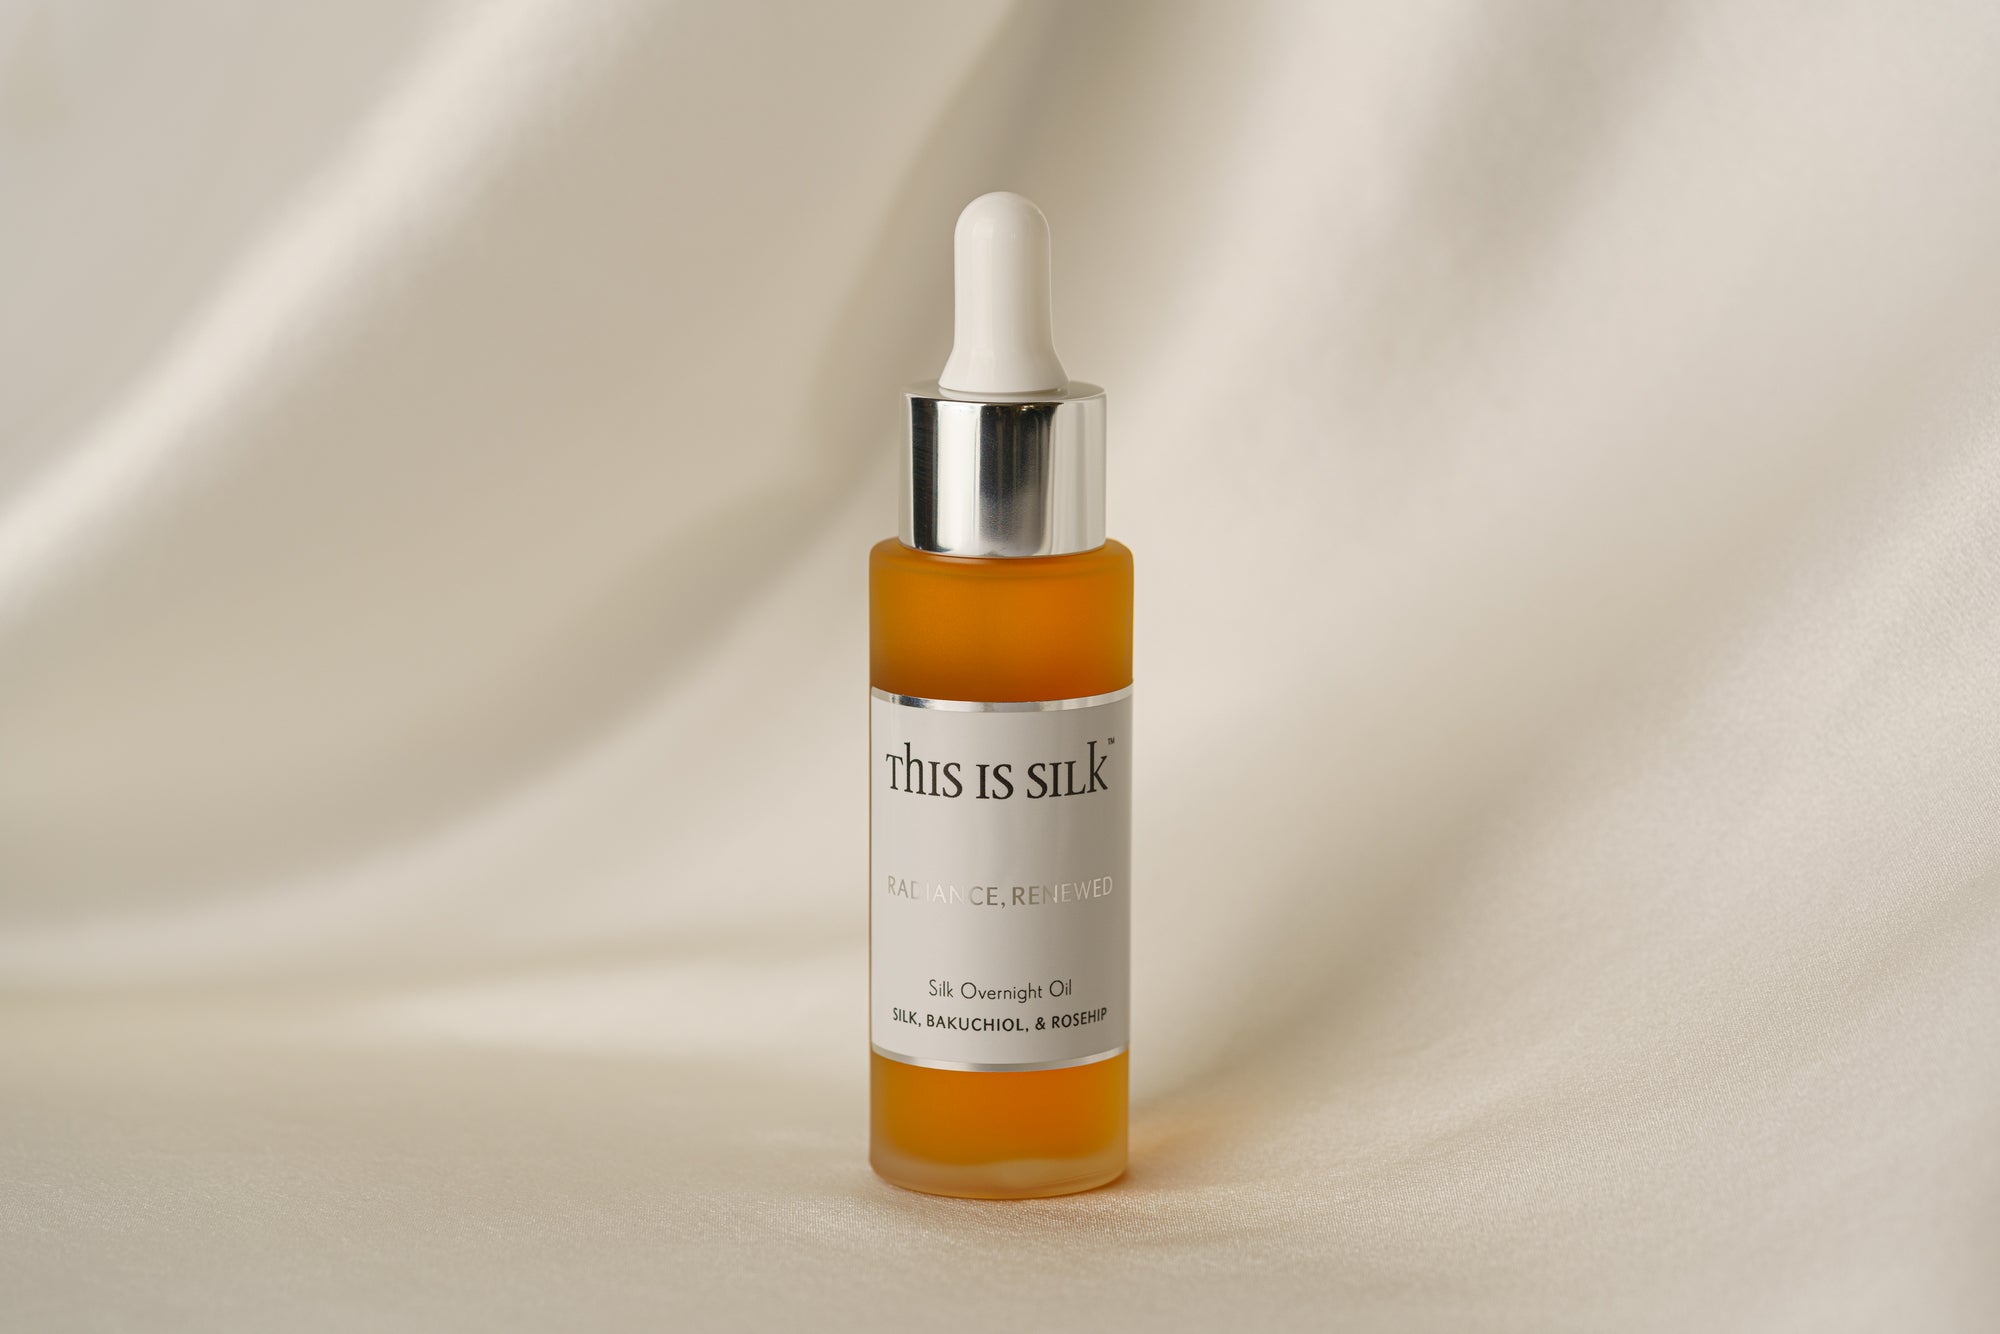 Radiance Renewed Silk Overnight Oil, Award Winning Facial Oil at the Global Beauty Awards, judged Independently. With Silk, Bakuchiol, Rosehip and Natural Essential Oils 